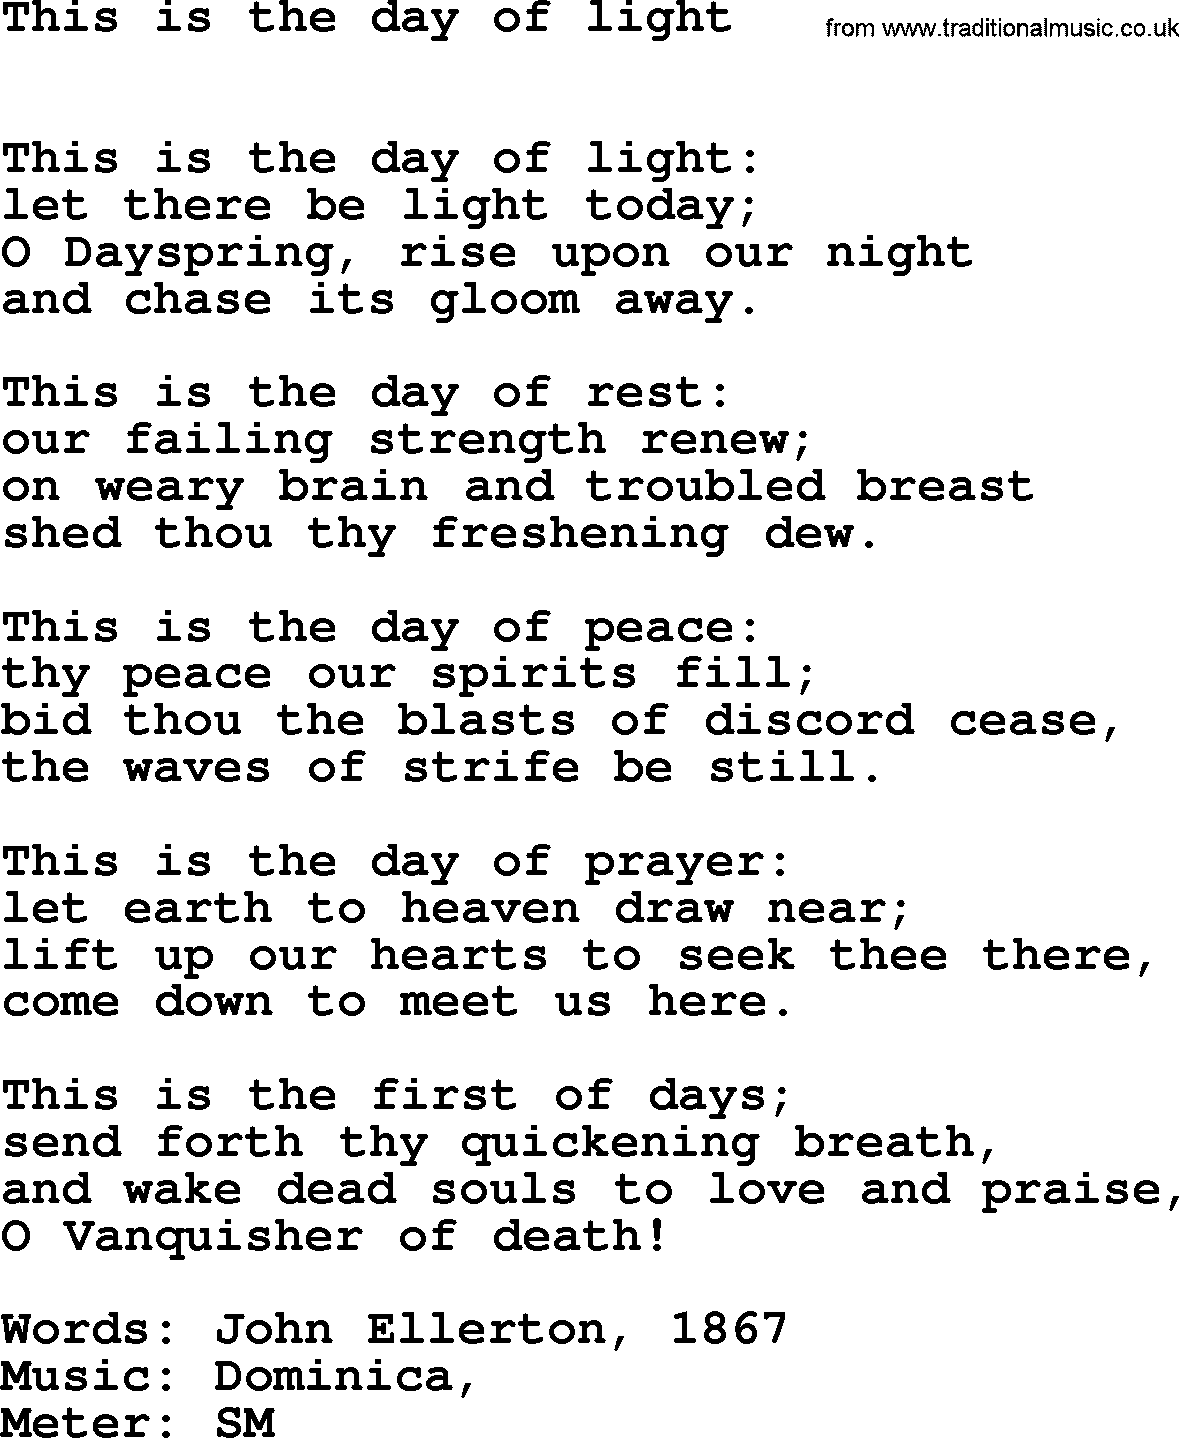 Book of Common Praise Hymn: This Is The Day Of Light.txt lyrics with midi music